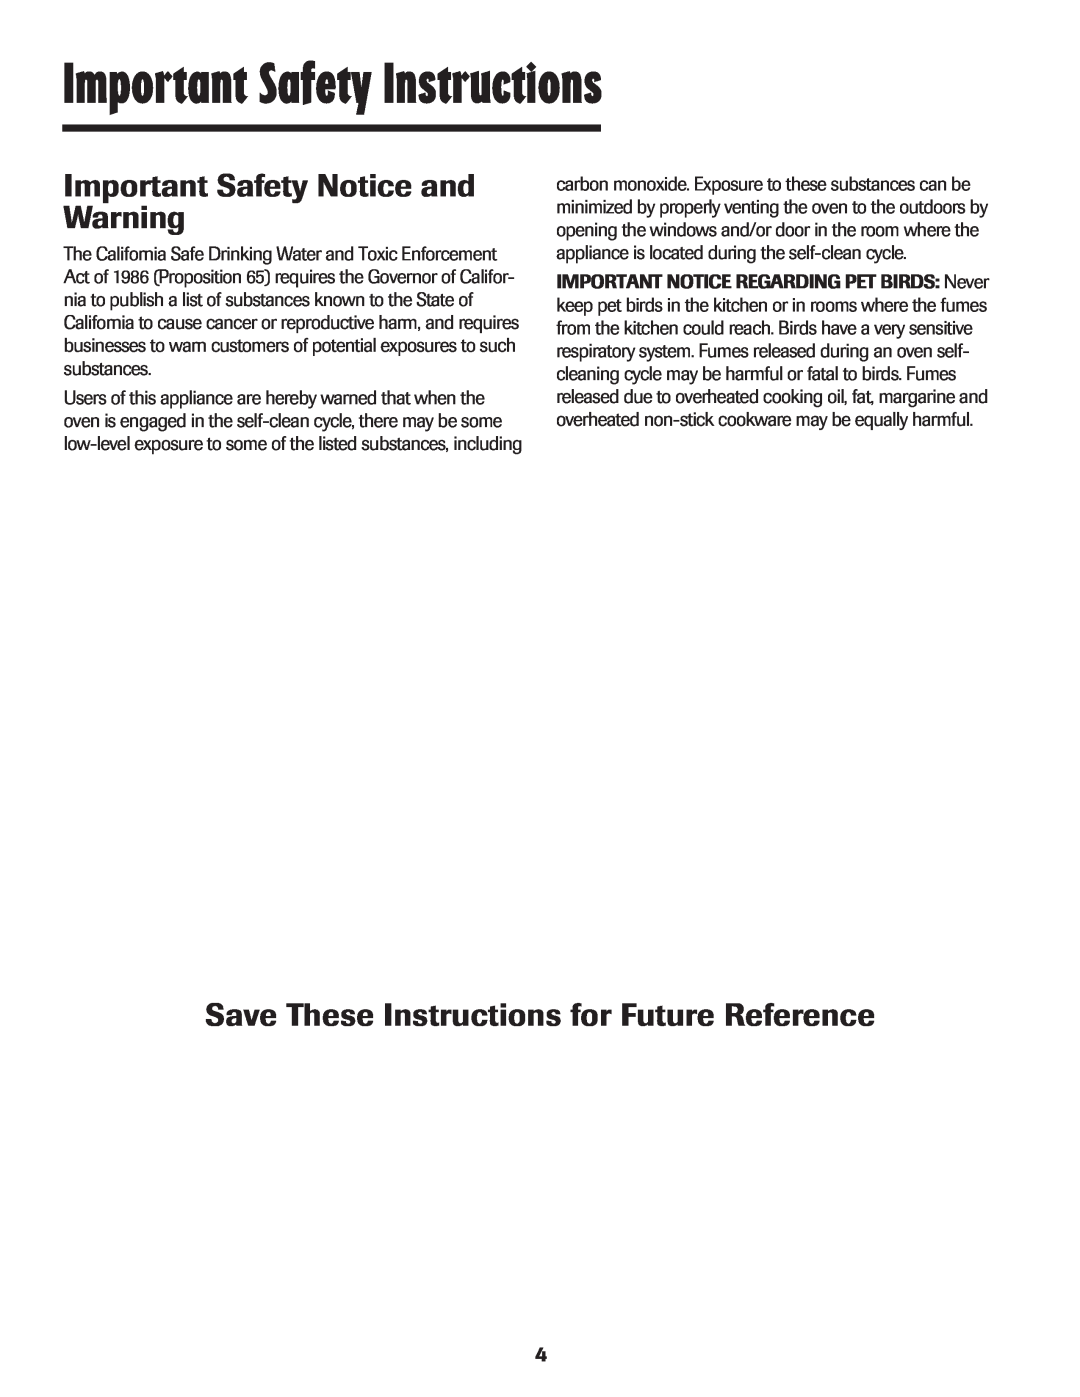 Maytag Oven warranty Important Safety Notice and Warning, Save These Instructions for Future Reference 